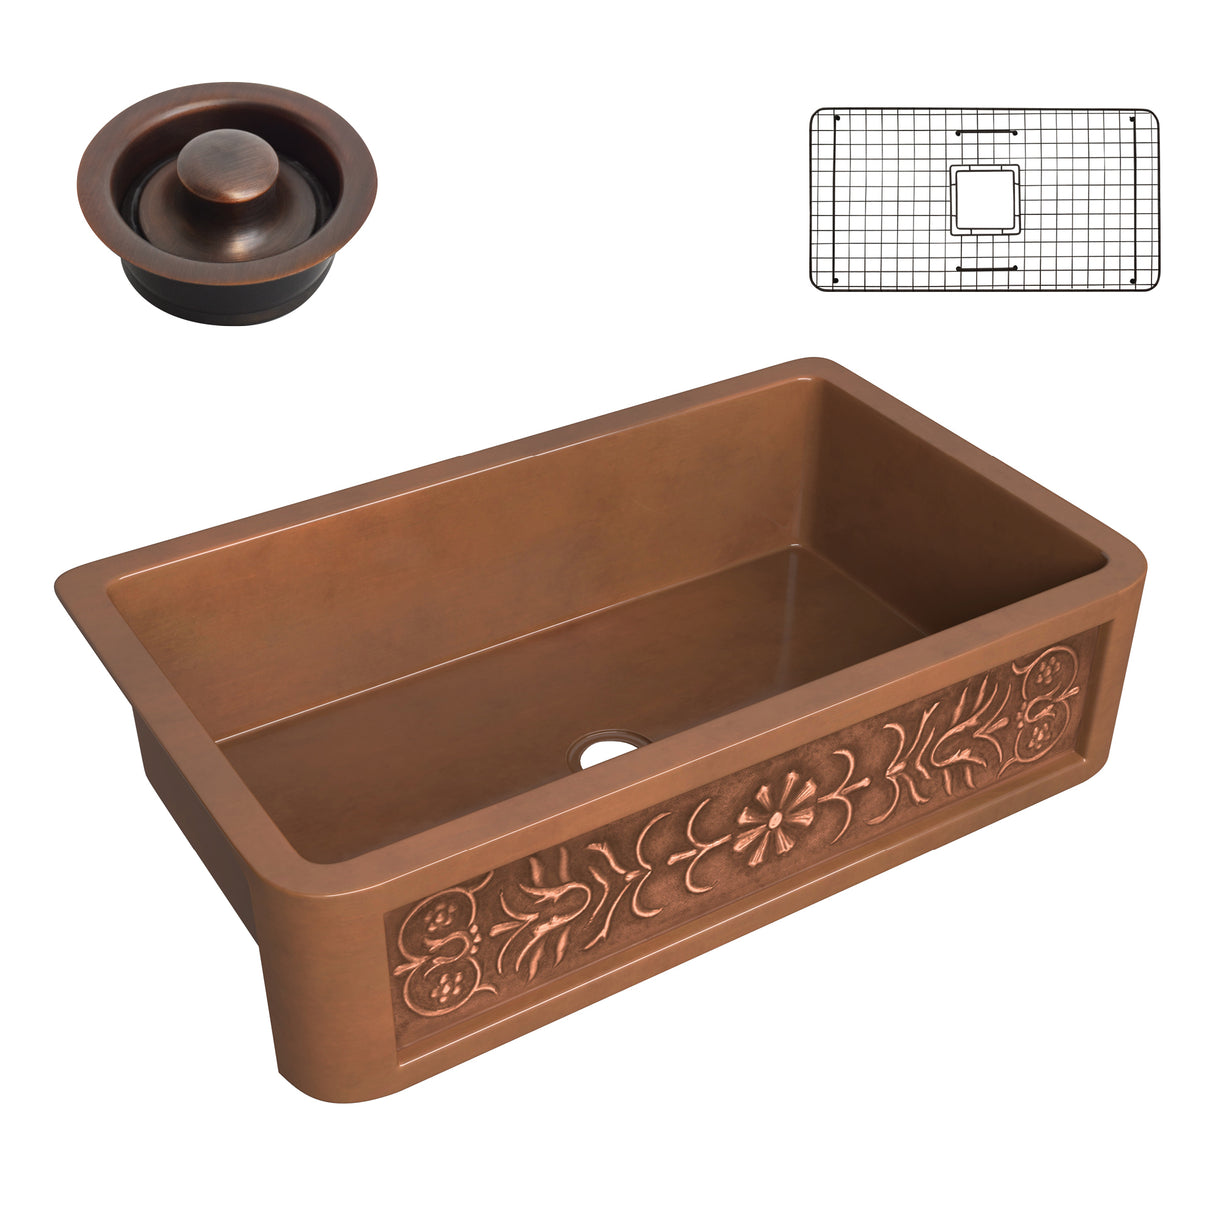 ANZZI SK-017 Thracian Farmhouse Handmade Copper 36 in. 0-Hole Single Bowl Kitchen Sink with Flower Design Panel in Polished Antique Copper